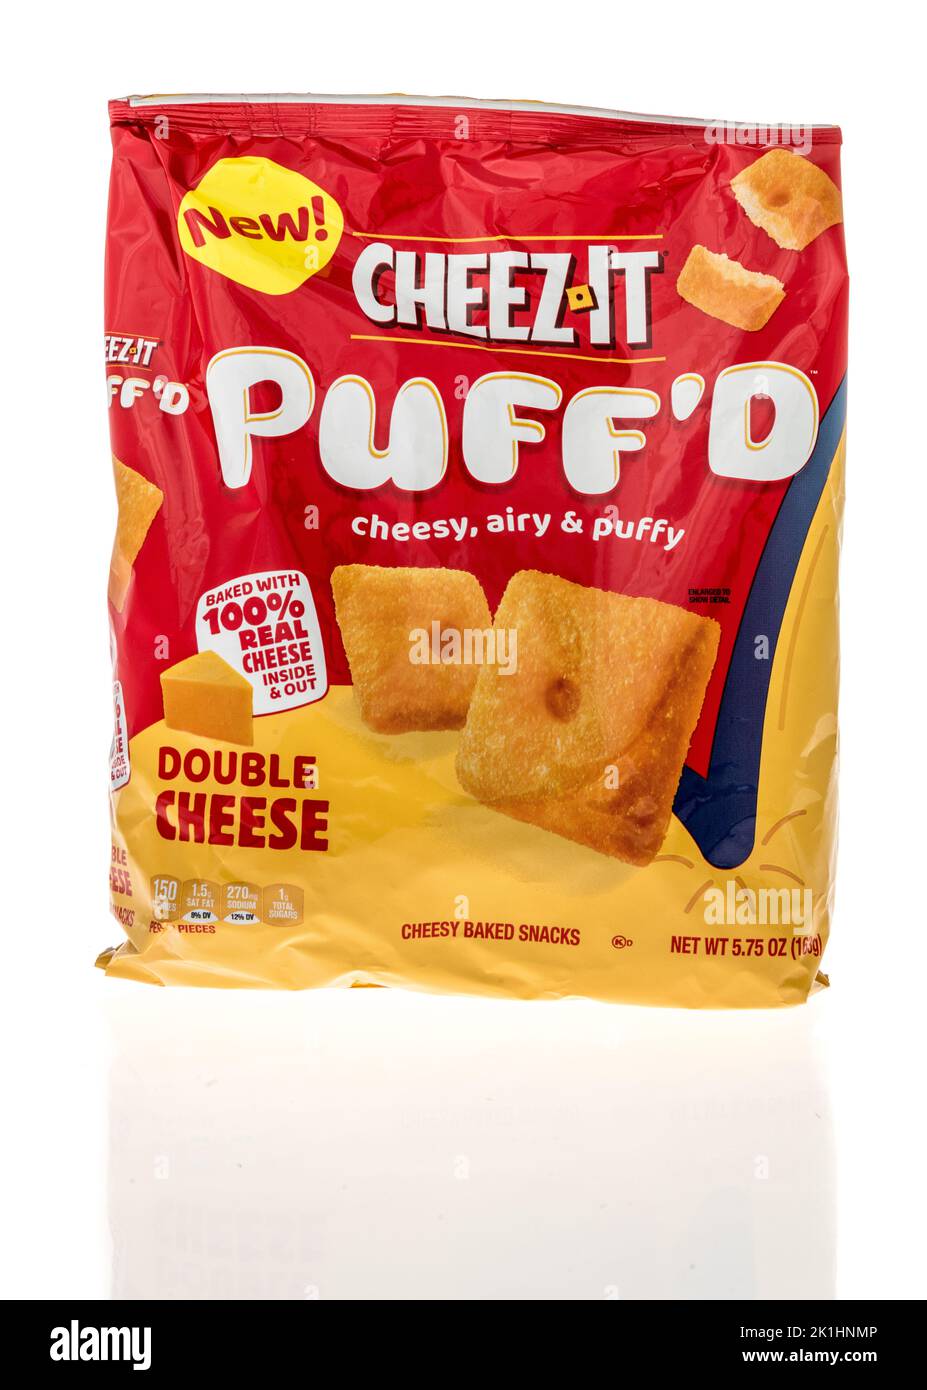 Winneconne, WI - 18 September 2022: A package of Cheez it puff'd cheesey, airy and puffy baked snacks on an isolated background. Stock Photo